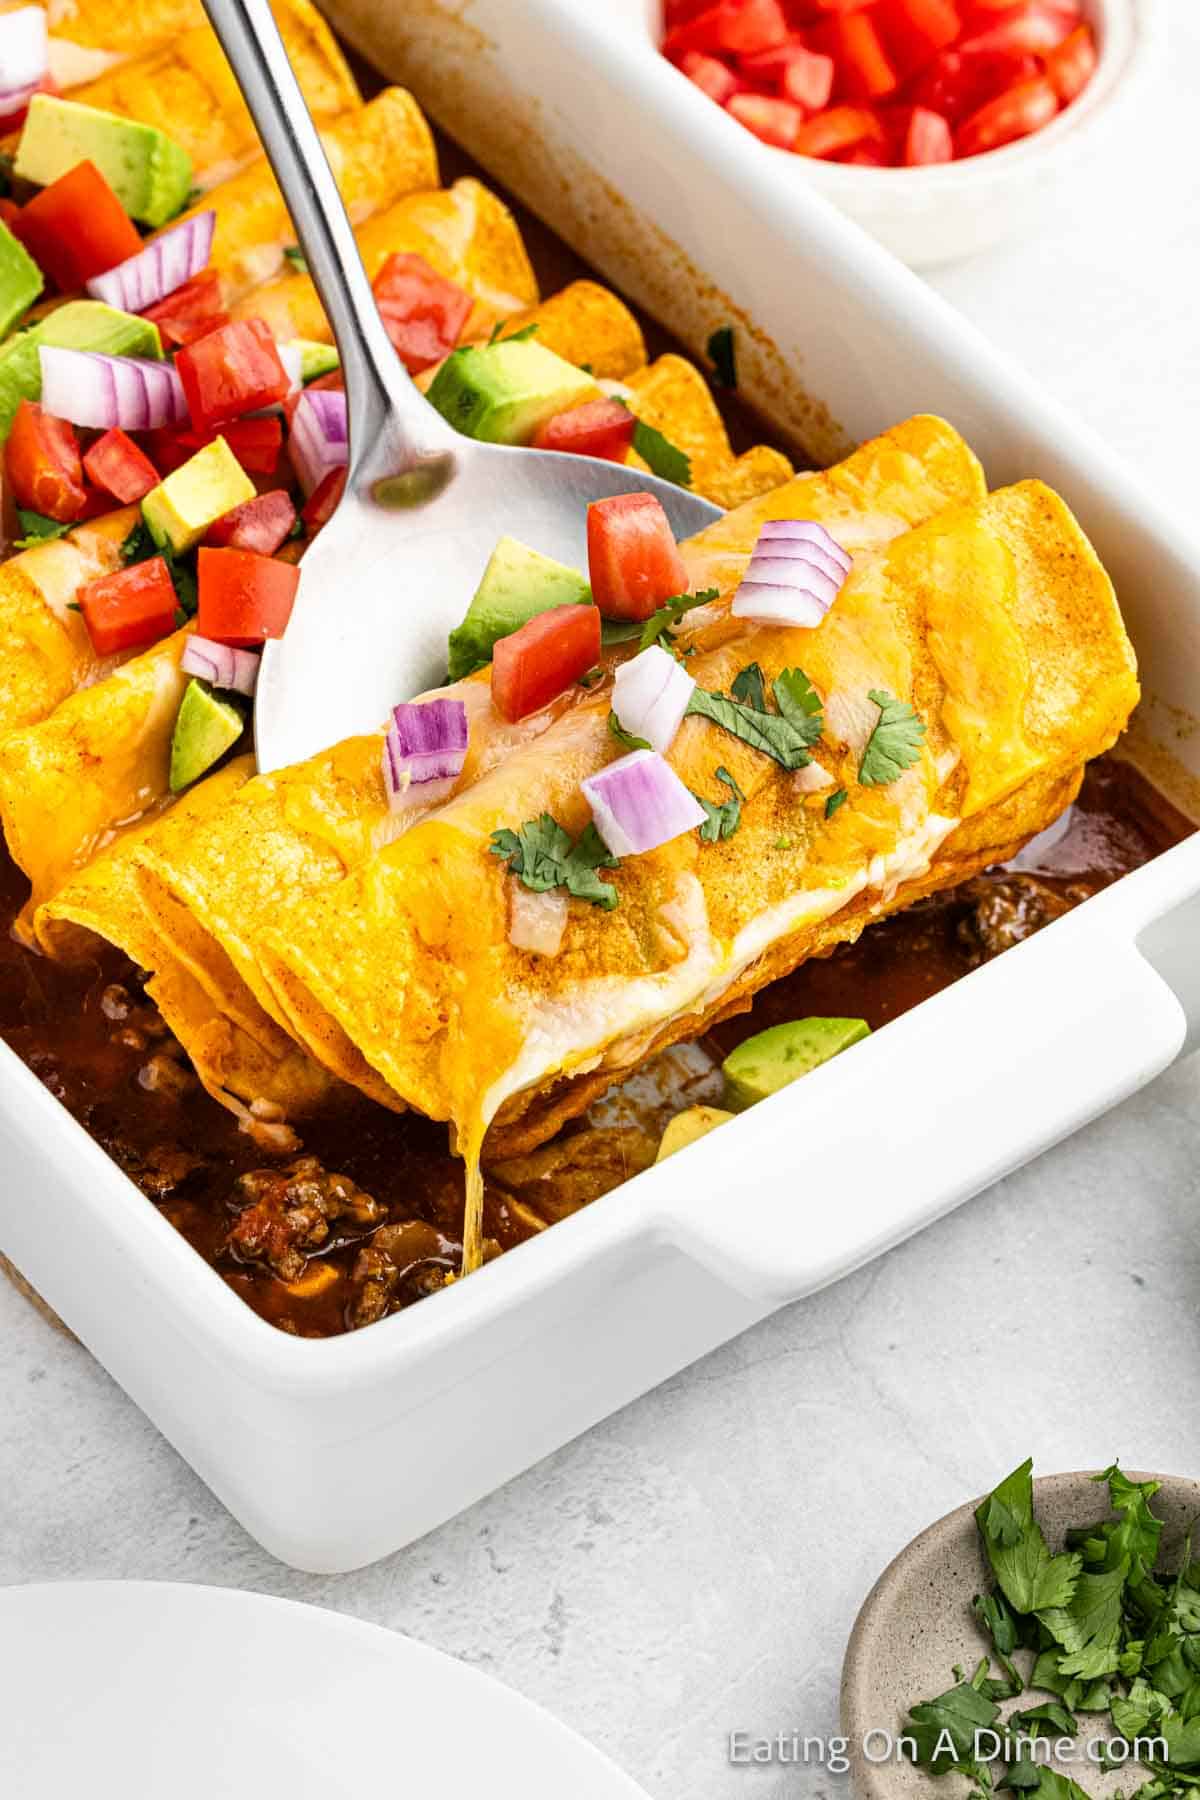 A white rectangular dish filled with Easy Ground Beef Enchiladas, topped with melted cheese, diced tomatoes, red onion, and avocado slices. A large serving spoon is lifting one enchilada from the dish. Fresh cilantro is visible on the side.